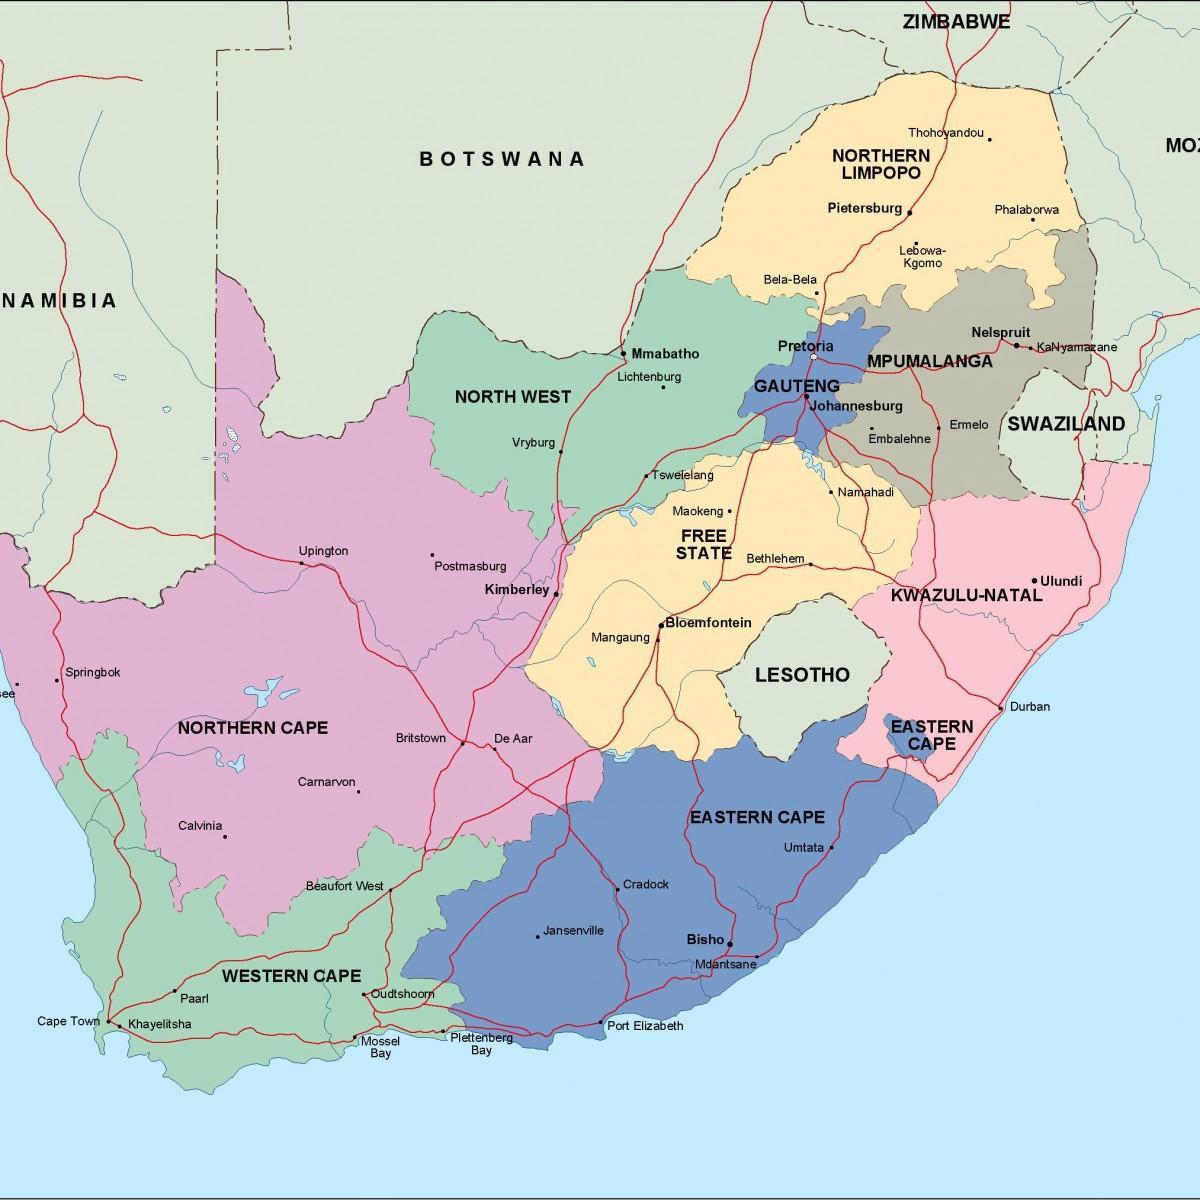 South Africa administrative map